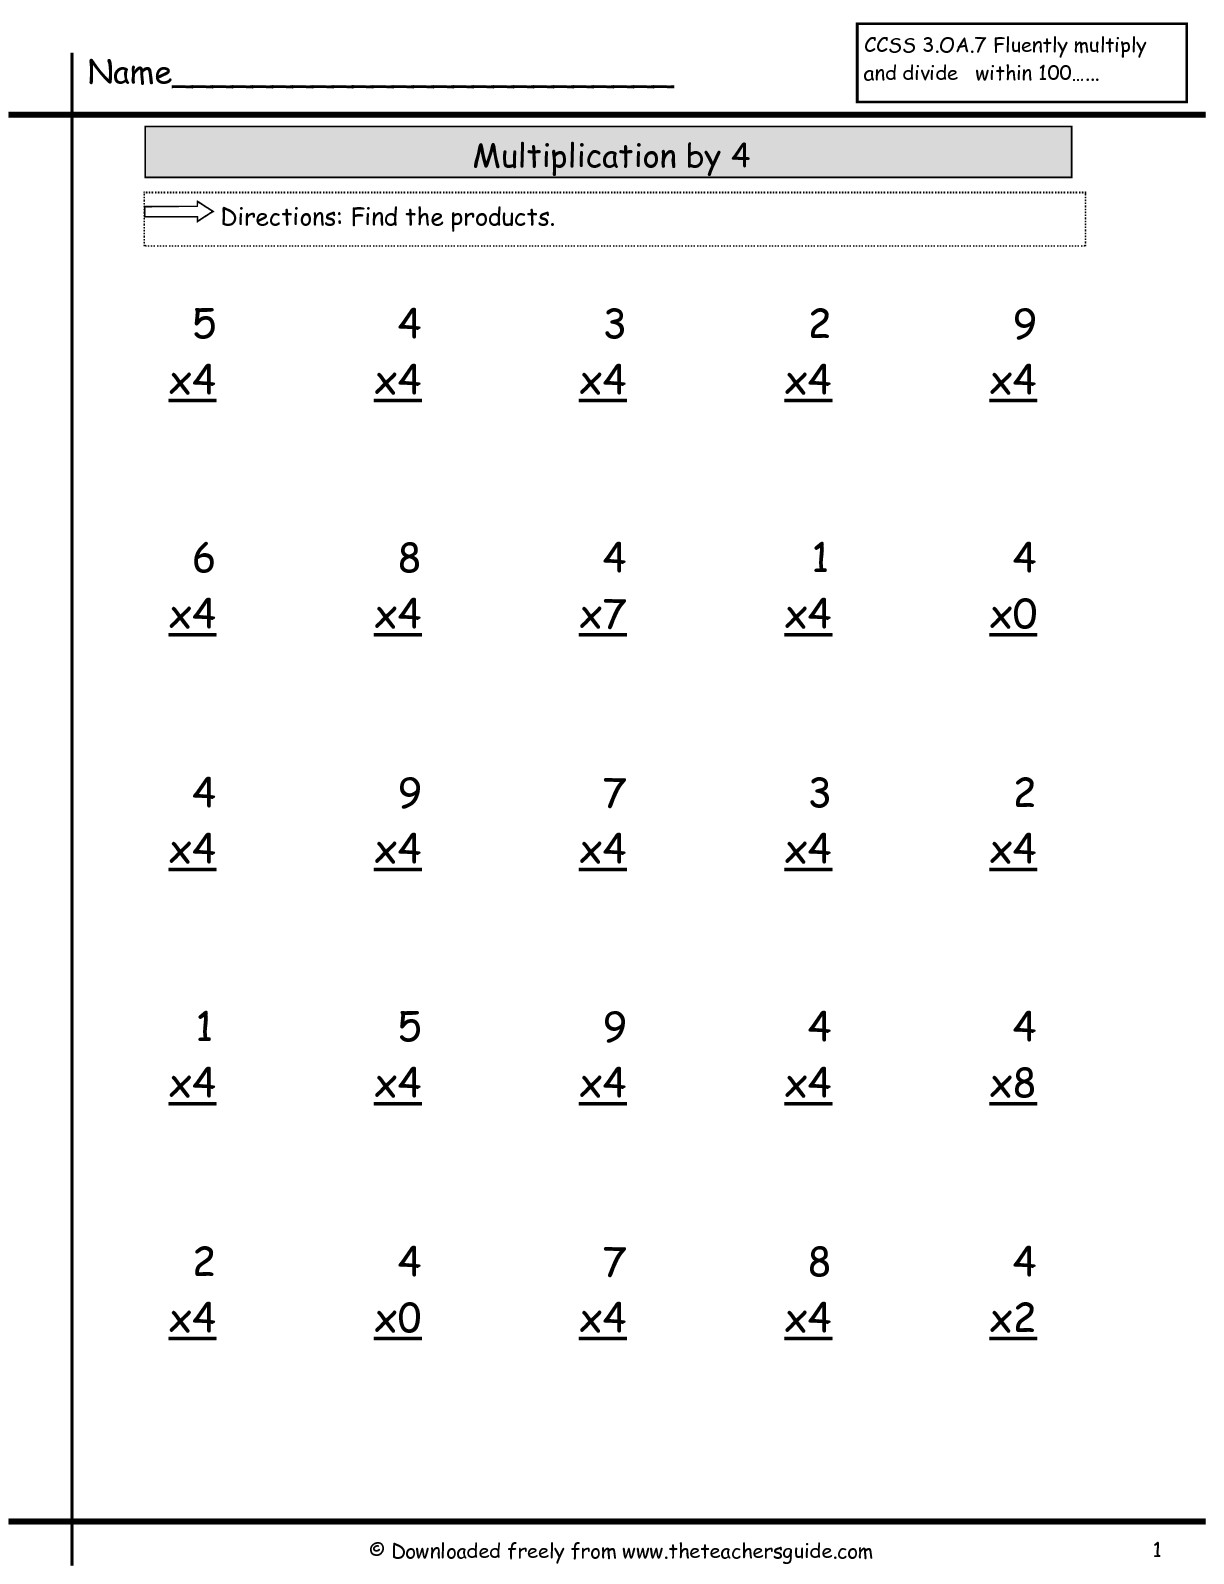 13-best-images-of-worksheets-counting-to-12-number-worksheets-0-20-4